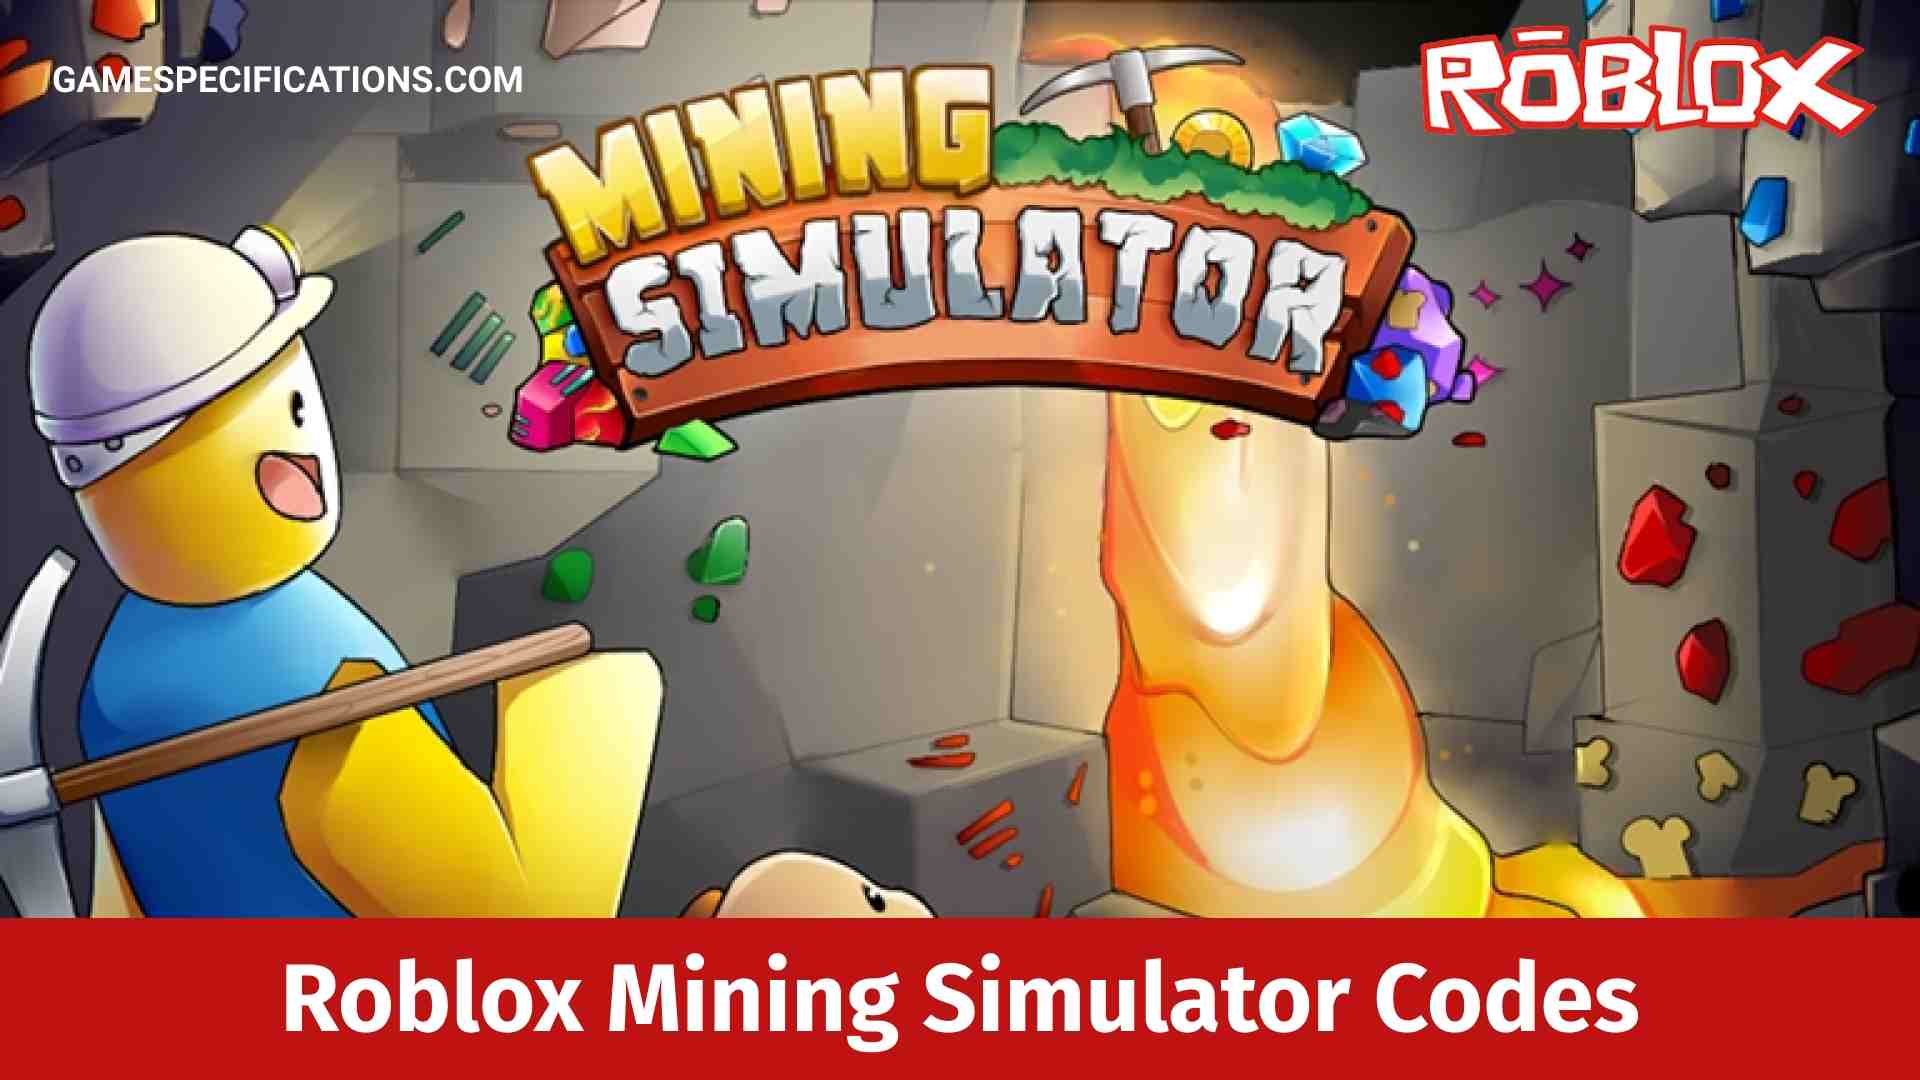 Codes For Mining Simulator 2 On Roblox